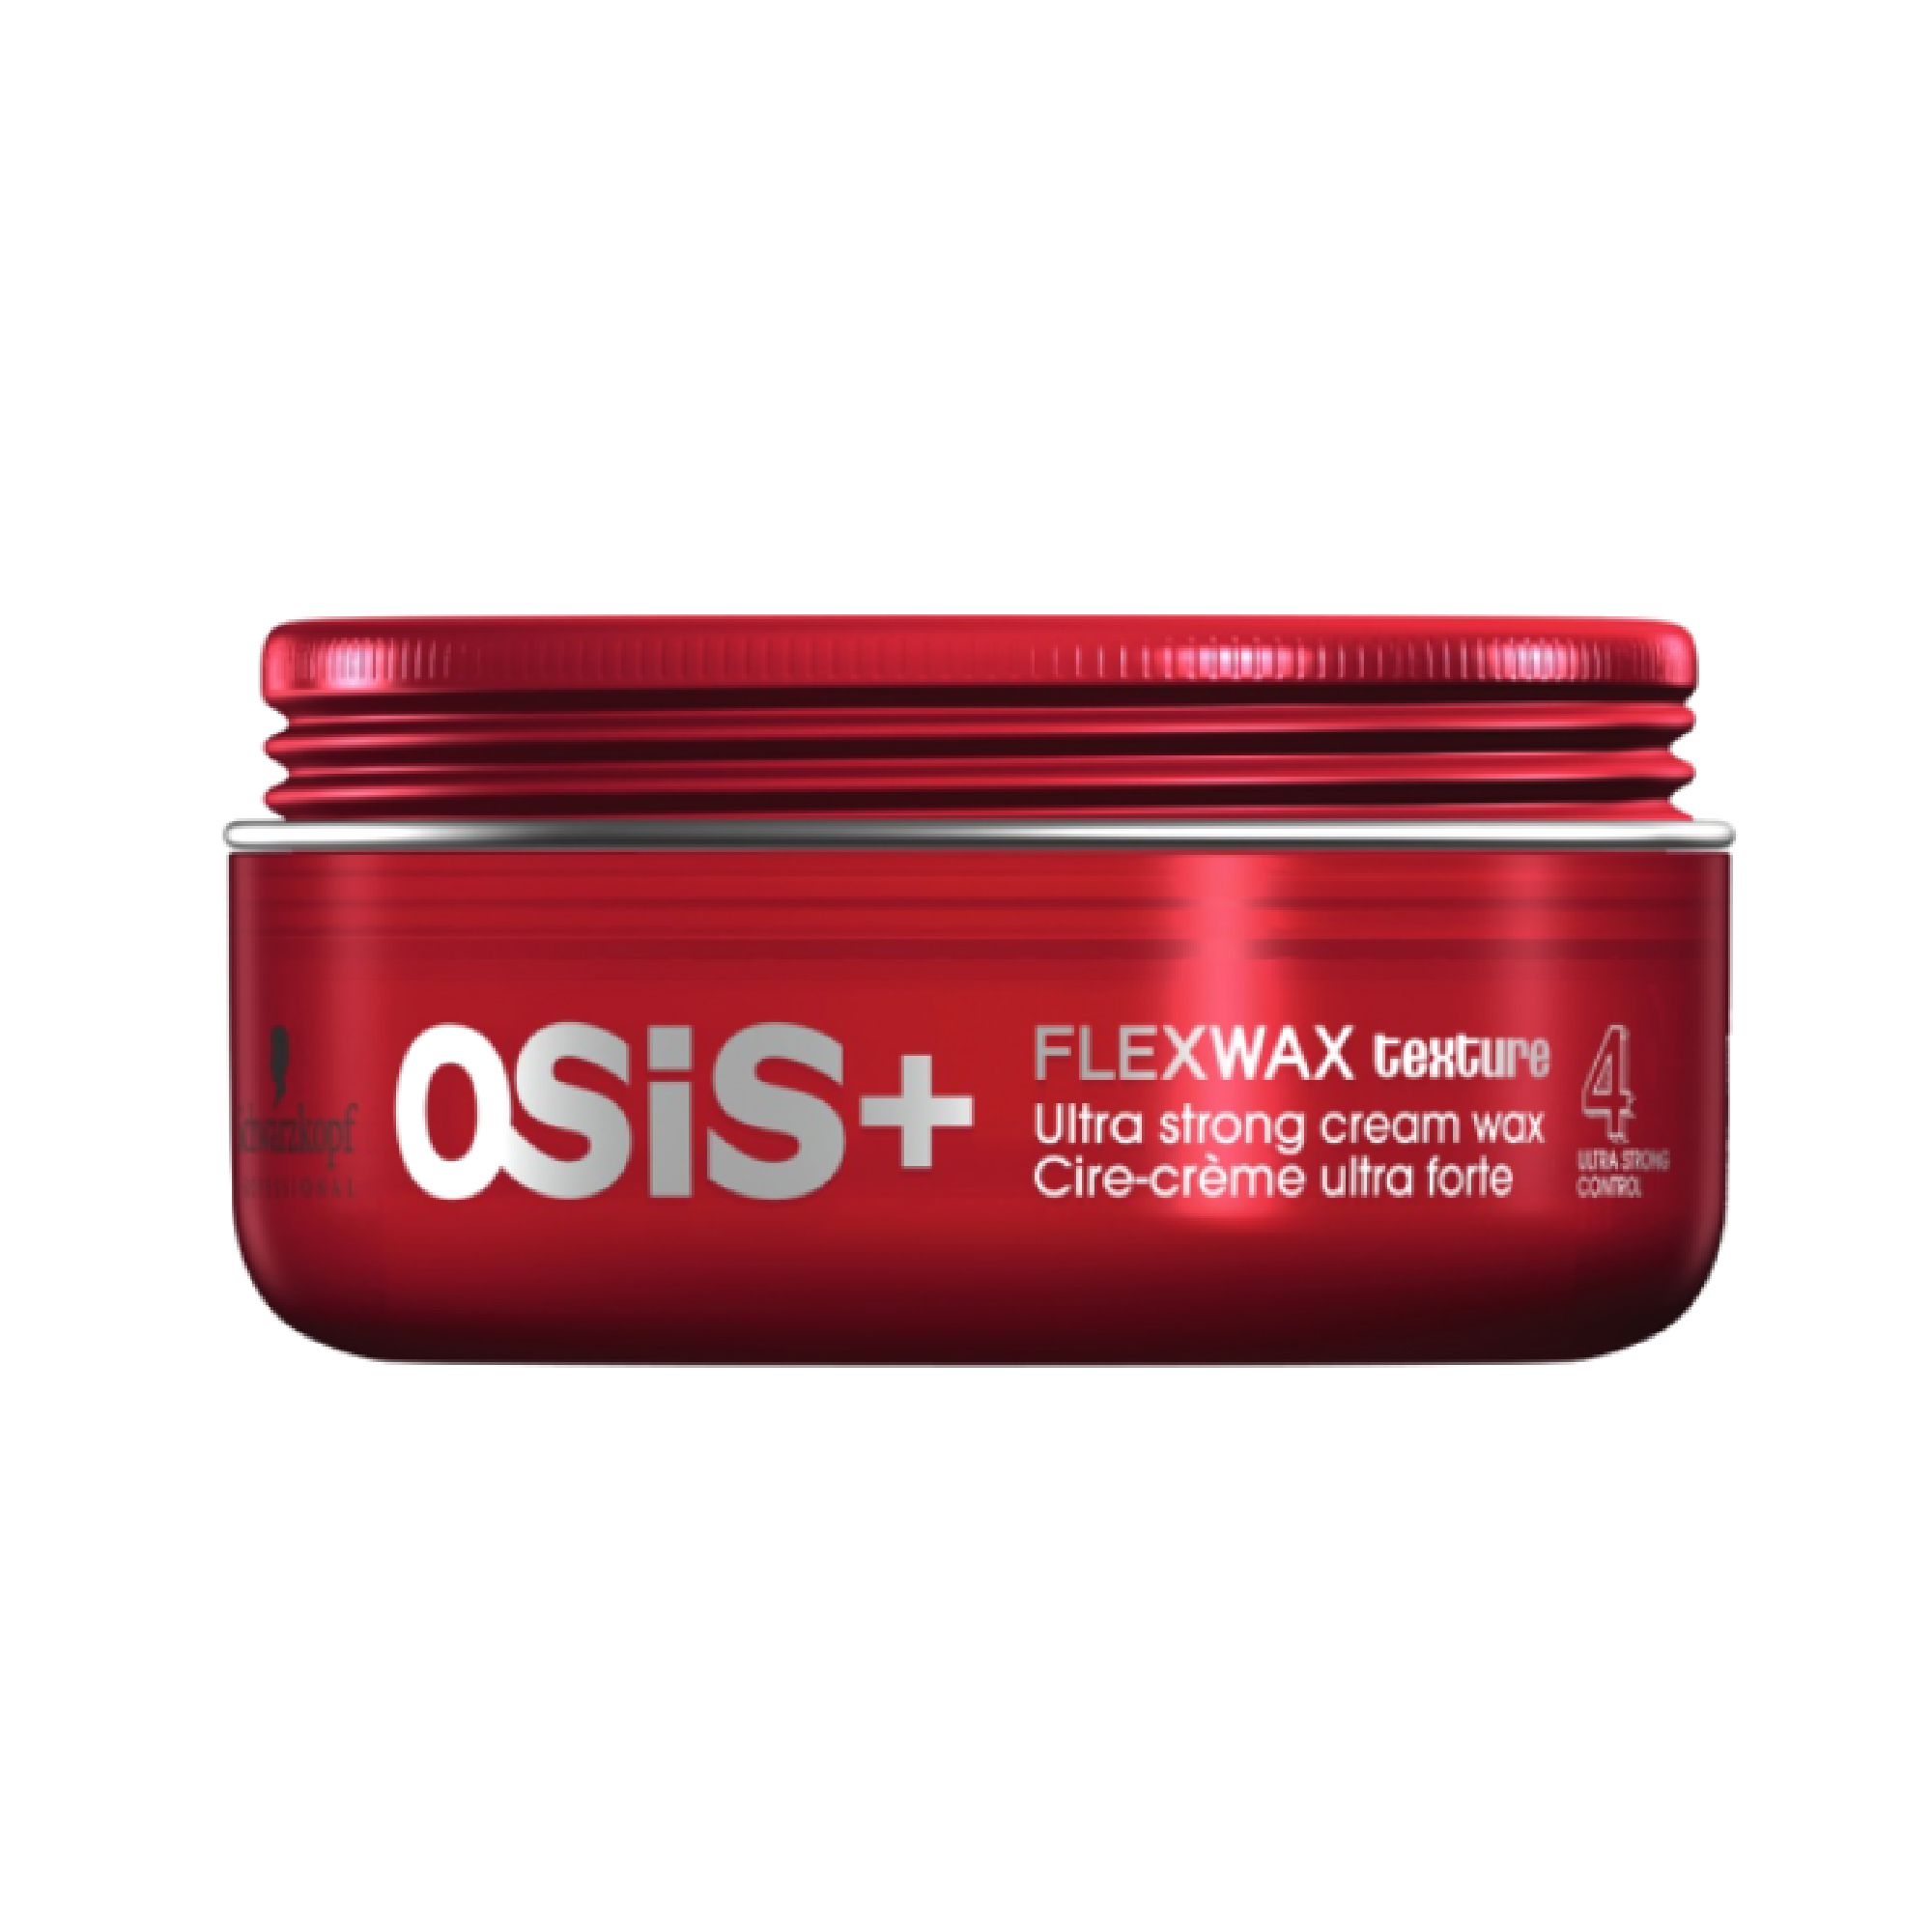 Osis Flexwax 85ml - Hair products New Zealand | Nation wide hairdressing &  hair care group